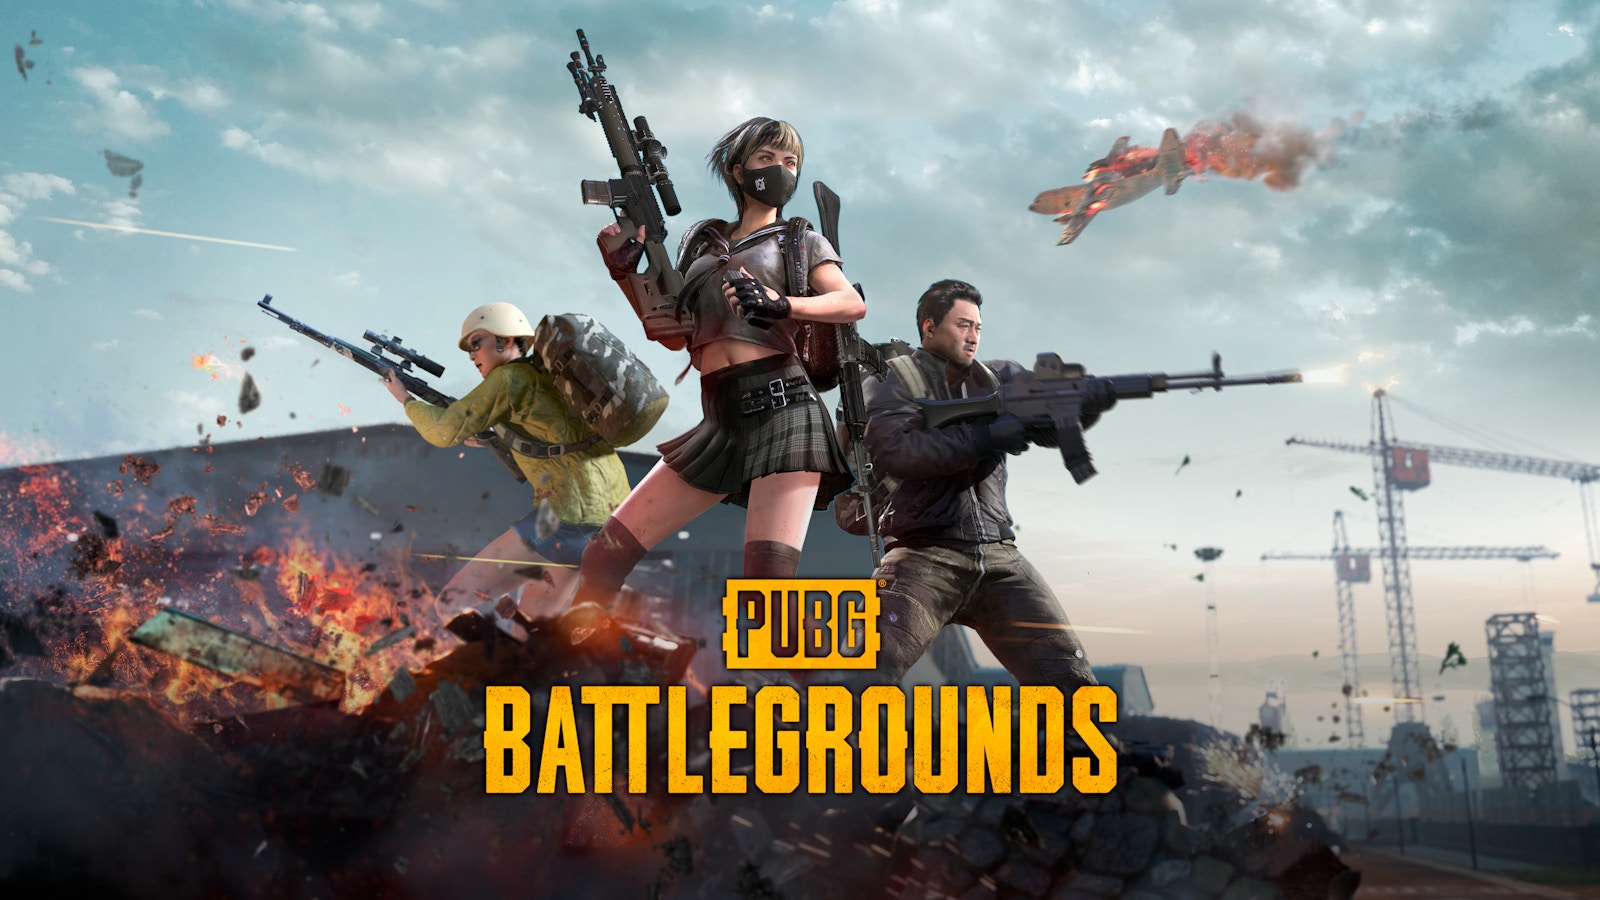 PUBG is FREE - Download the game that inspired Fortnite for free right now, Gaming, Entertainment